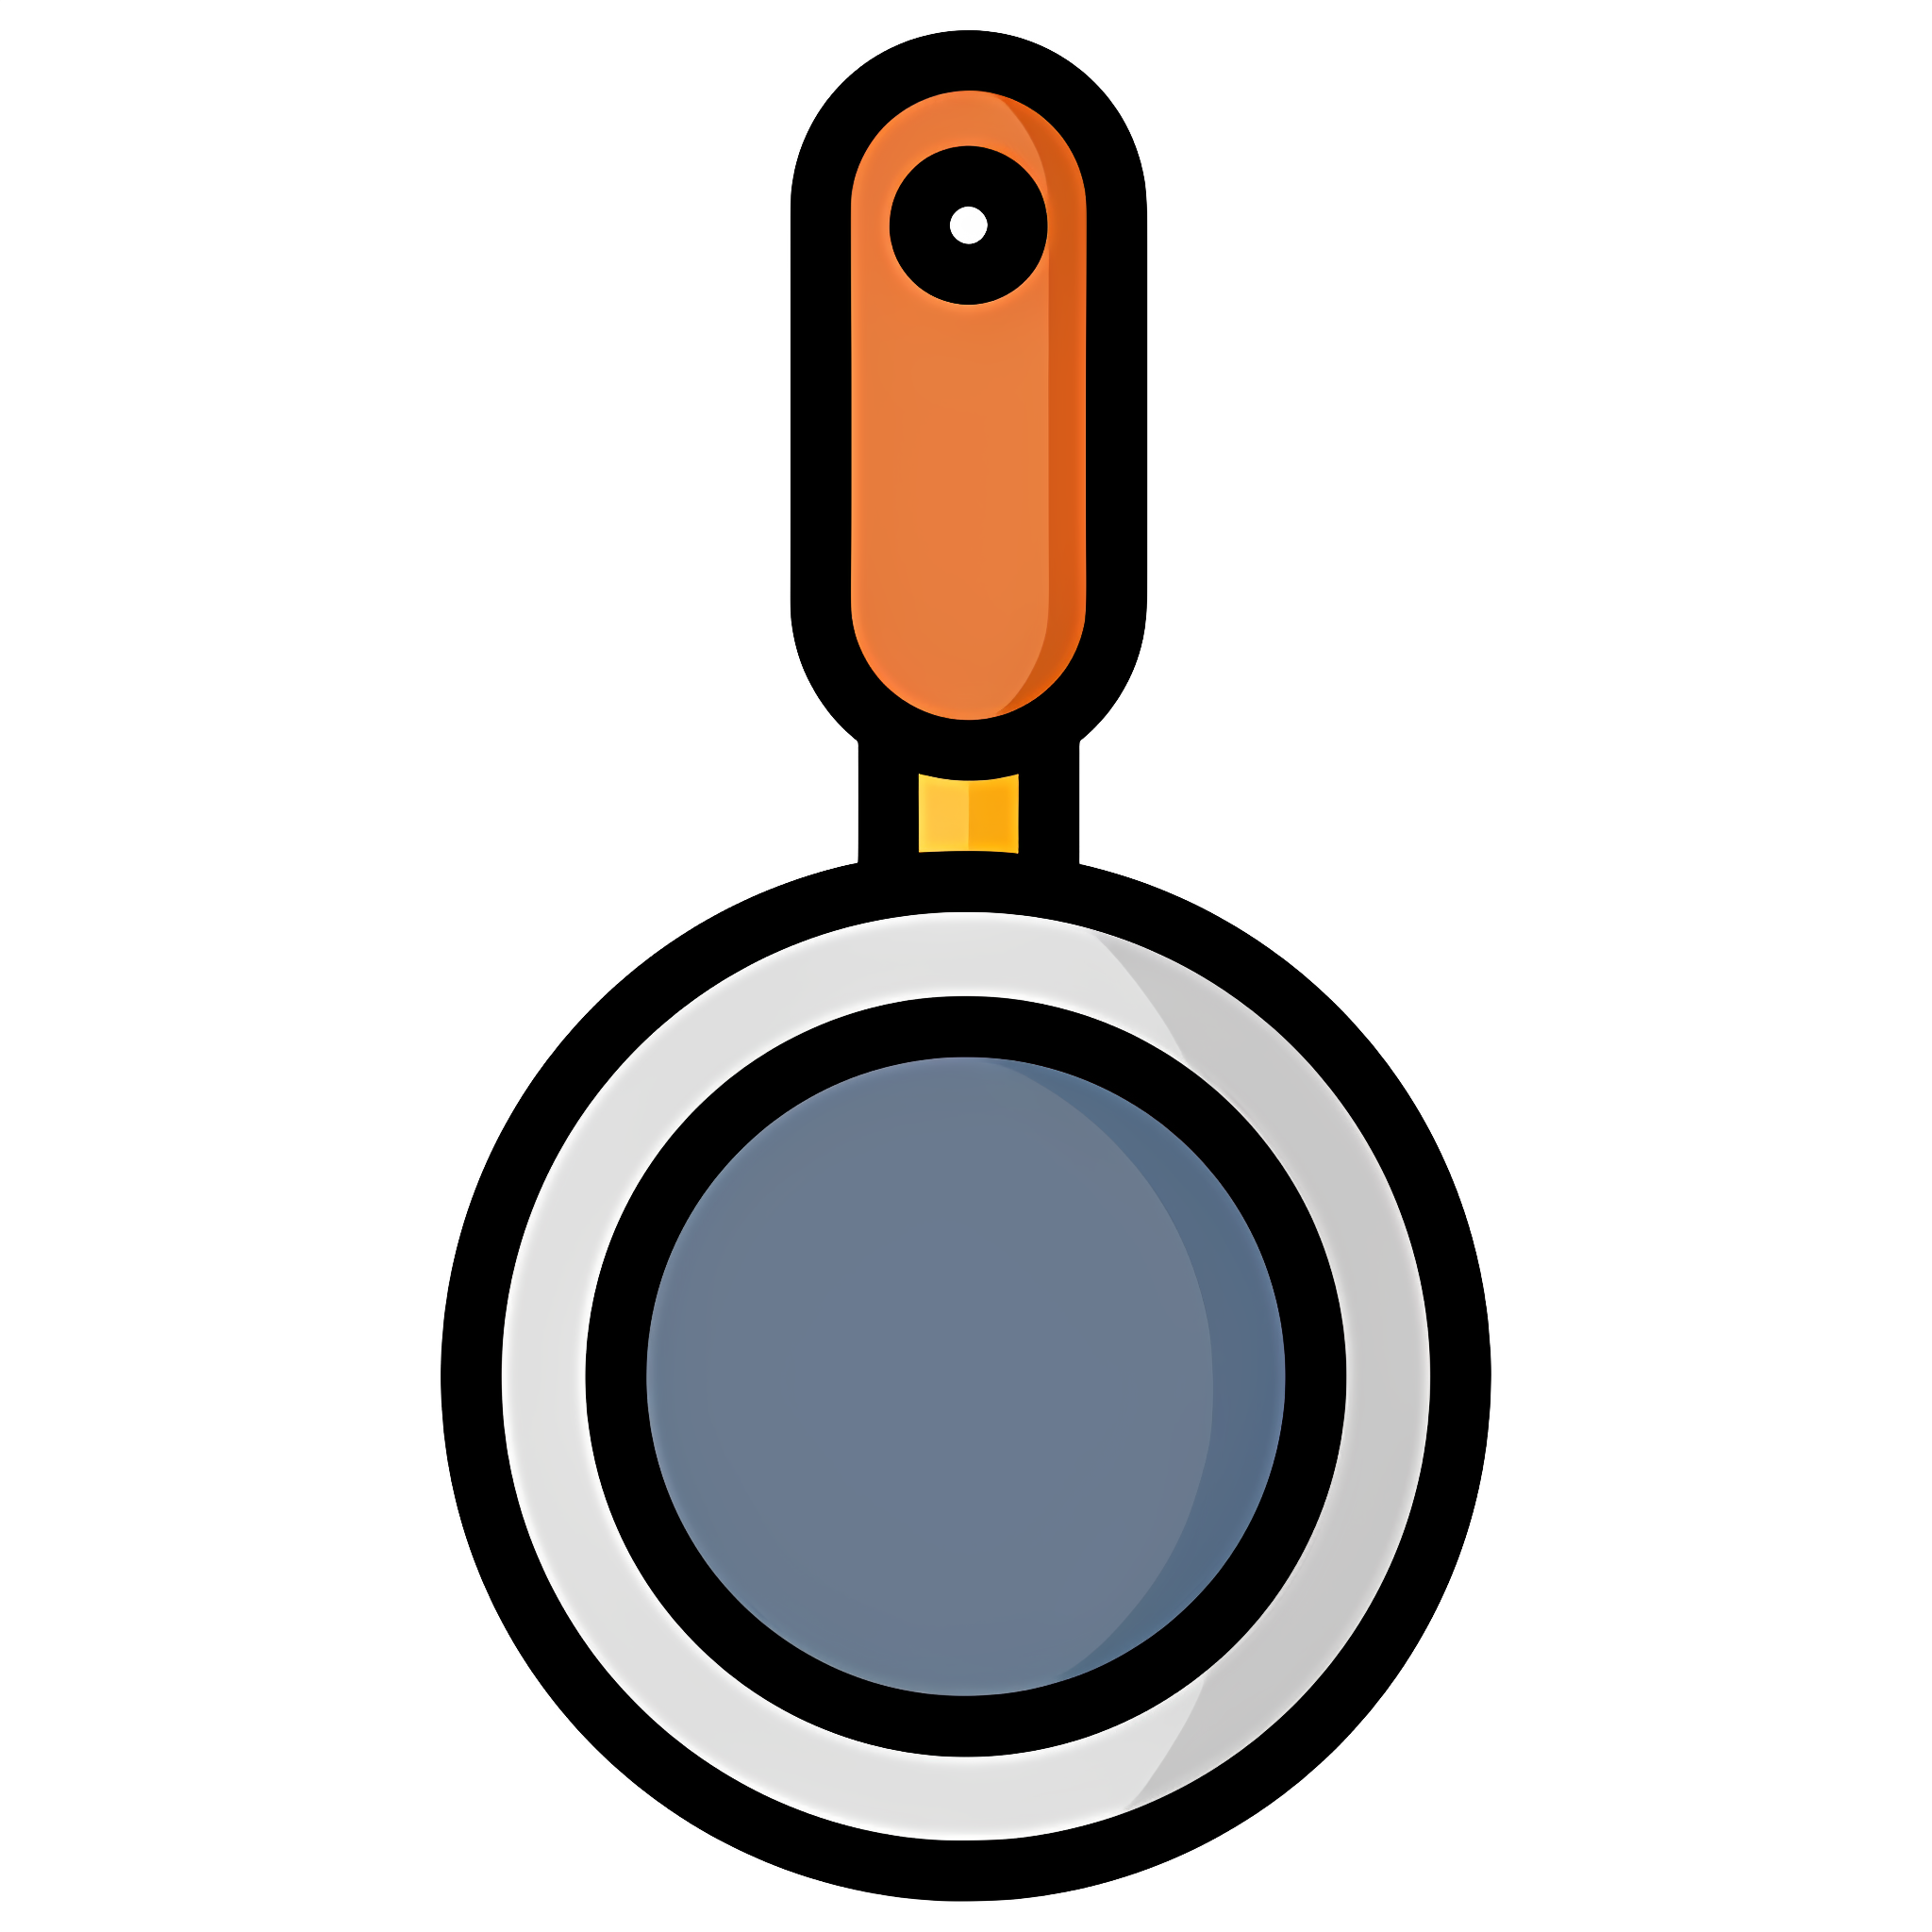 Circular pan with orange flame on black background Clipart